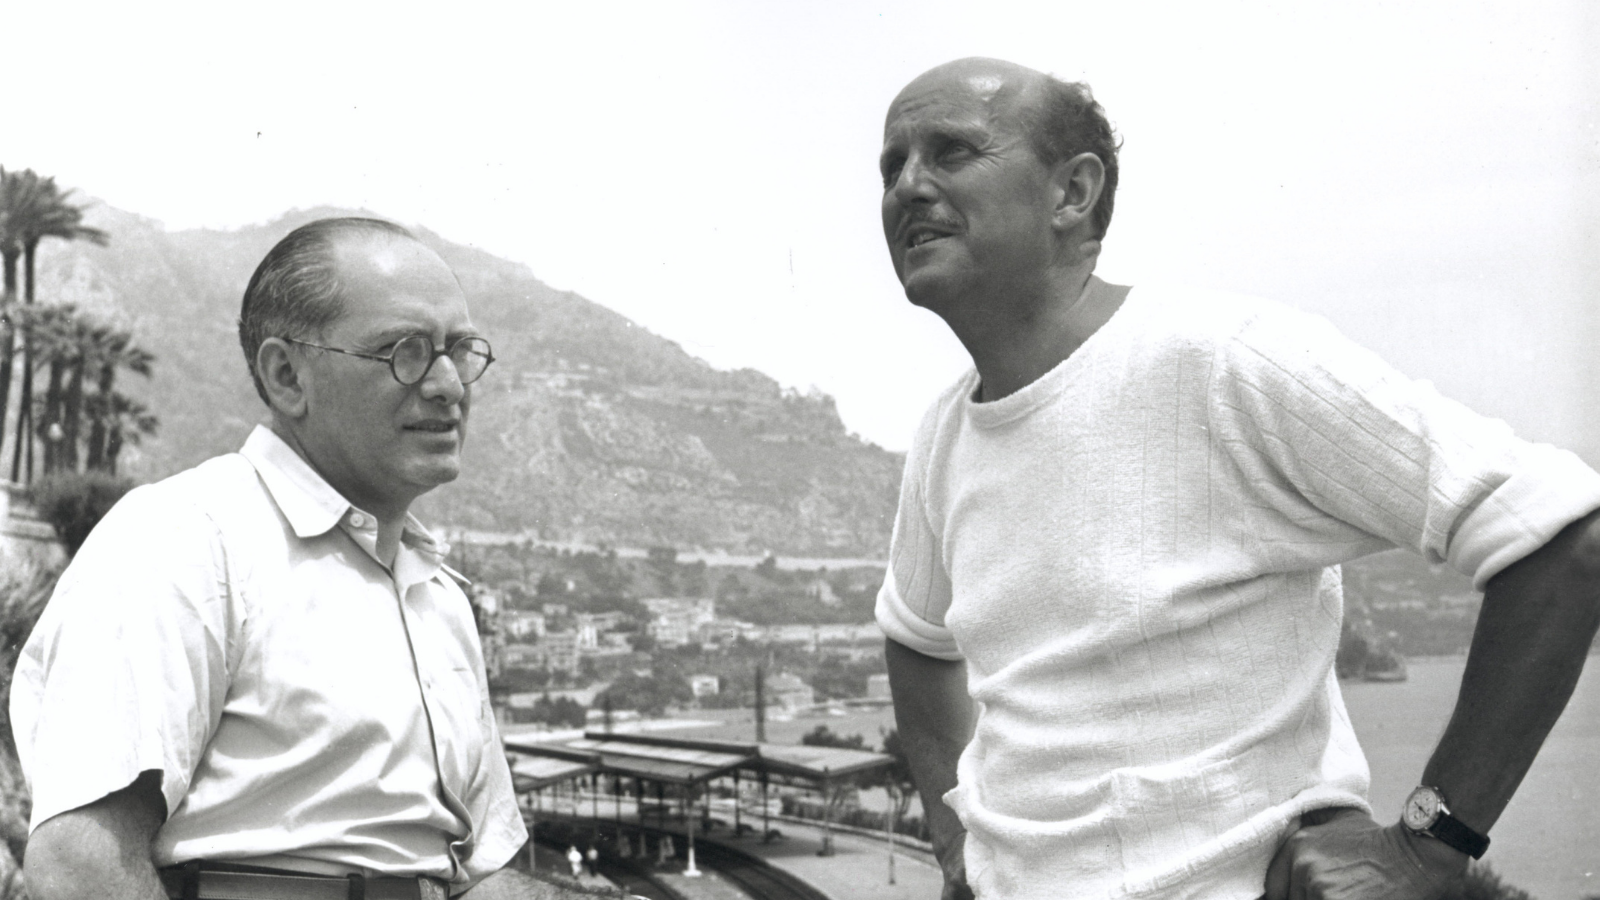 Two men in white shirts, in the distance, the outlines of buildings built into the side of a mountain. There is a harbour to the right. One man looks at the other with a quizzical look on his face, the other is staring off into the distance.